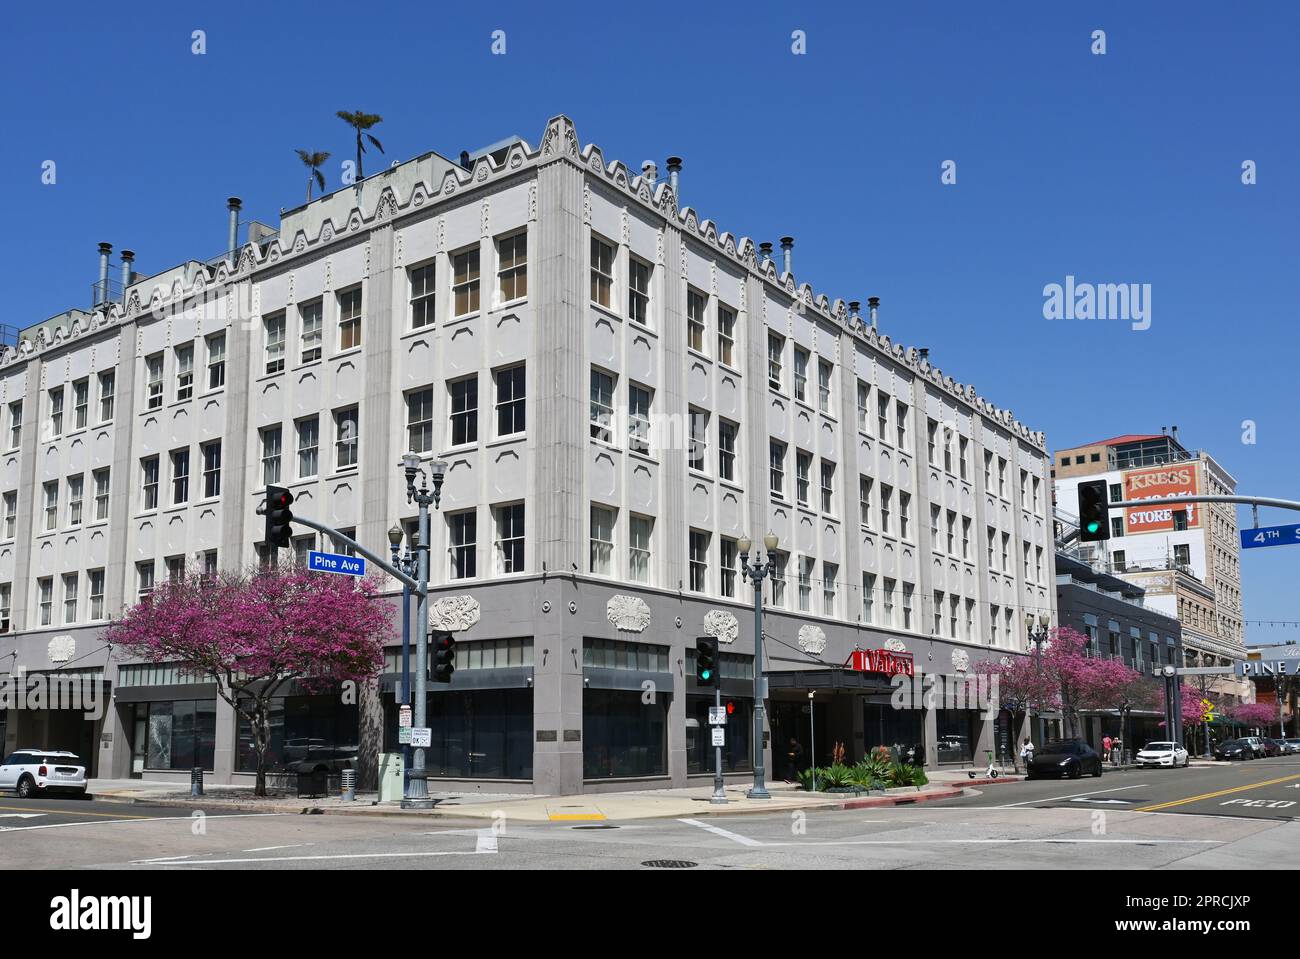 LONG BEACH, CALIFORNIA - 18 APR 23023: The Walker Building is a luxury loft conversion building in the heart of Long Beach. Stock Photo